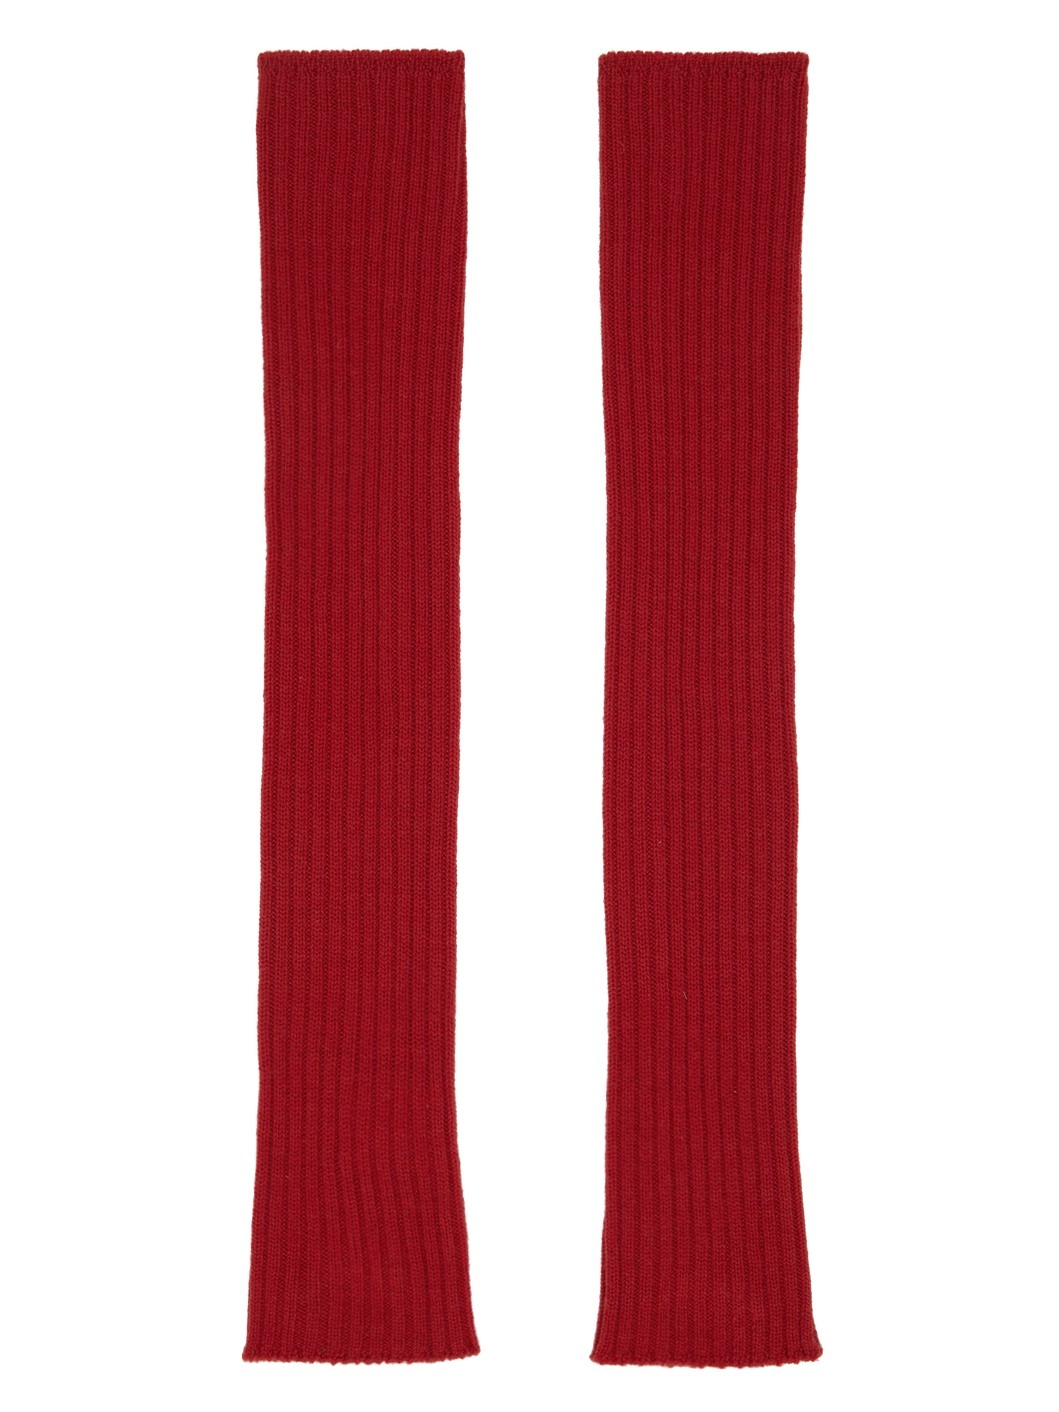 Red Rasato Knit Arm Warmers - 1